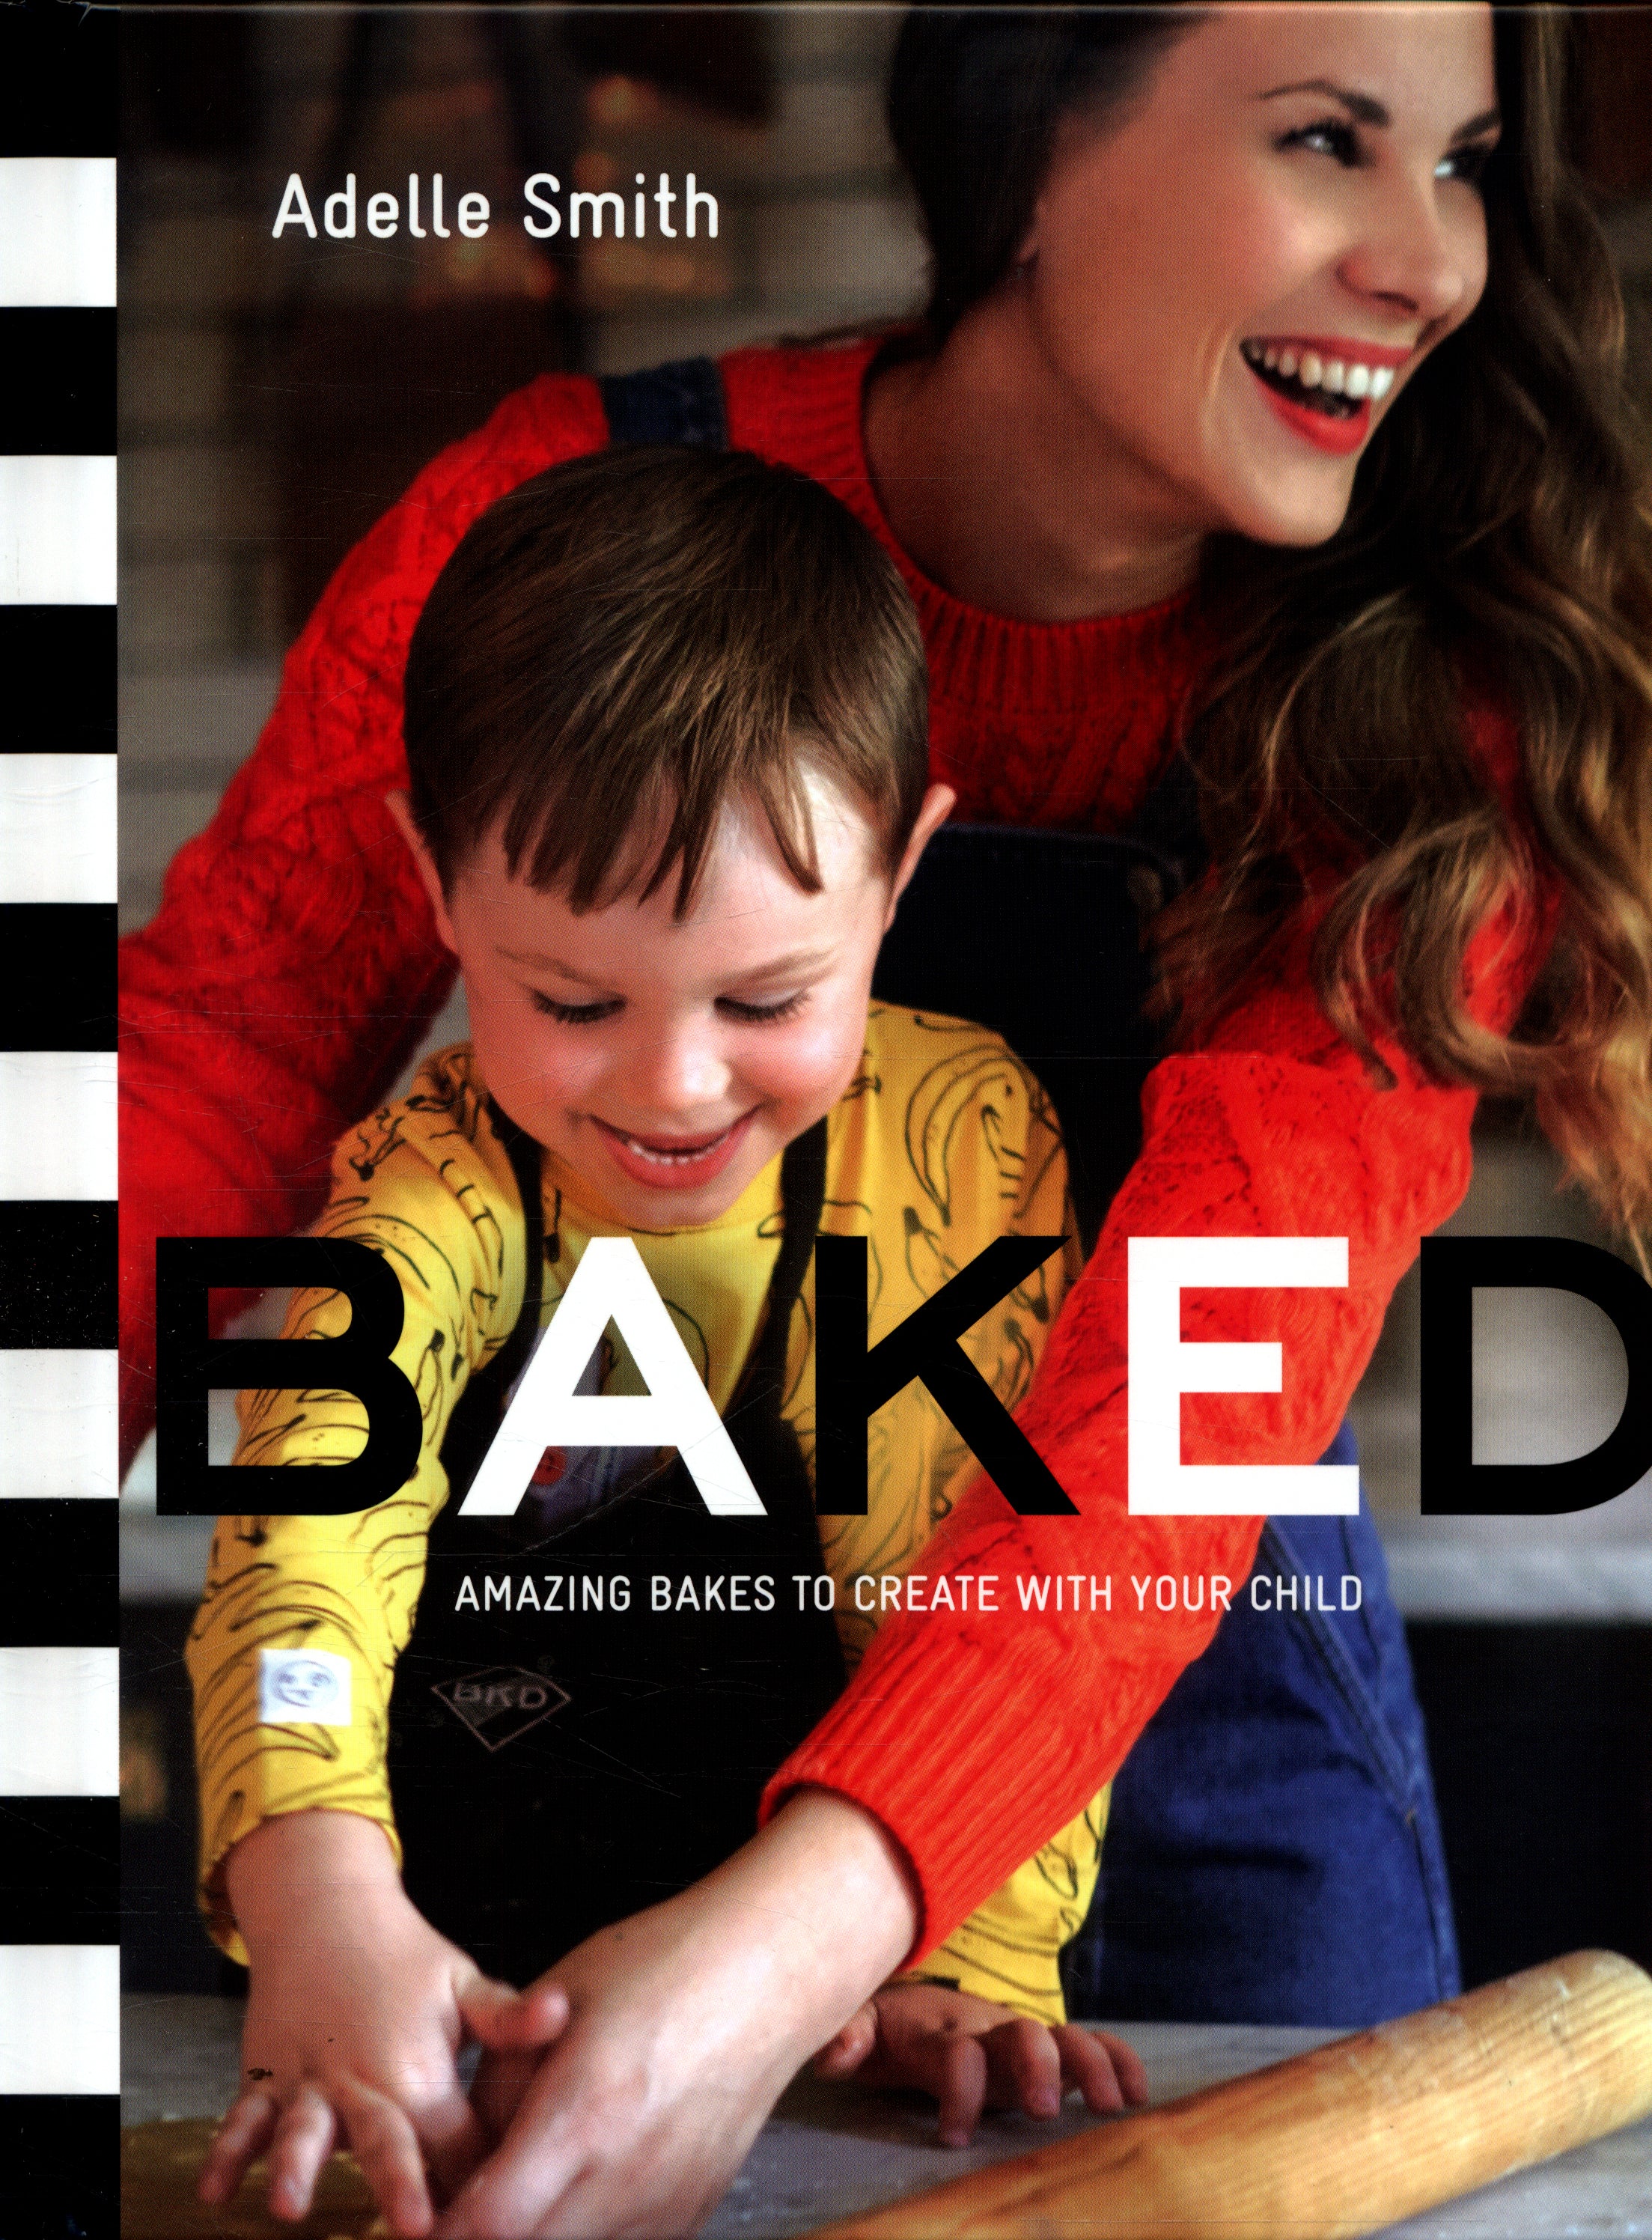 Baked : amazing bakes to create with your child